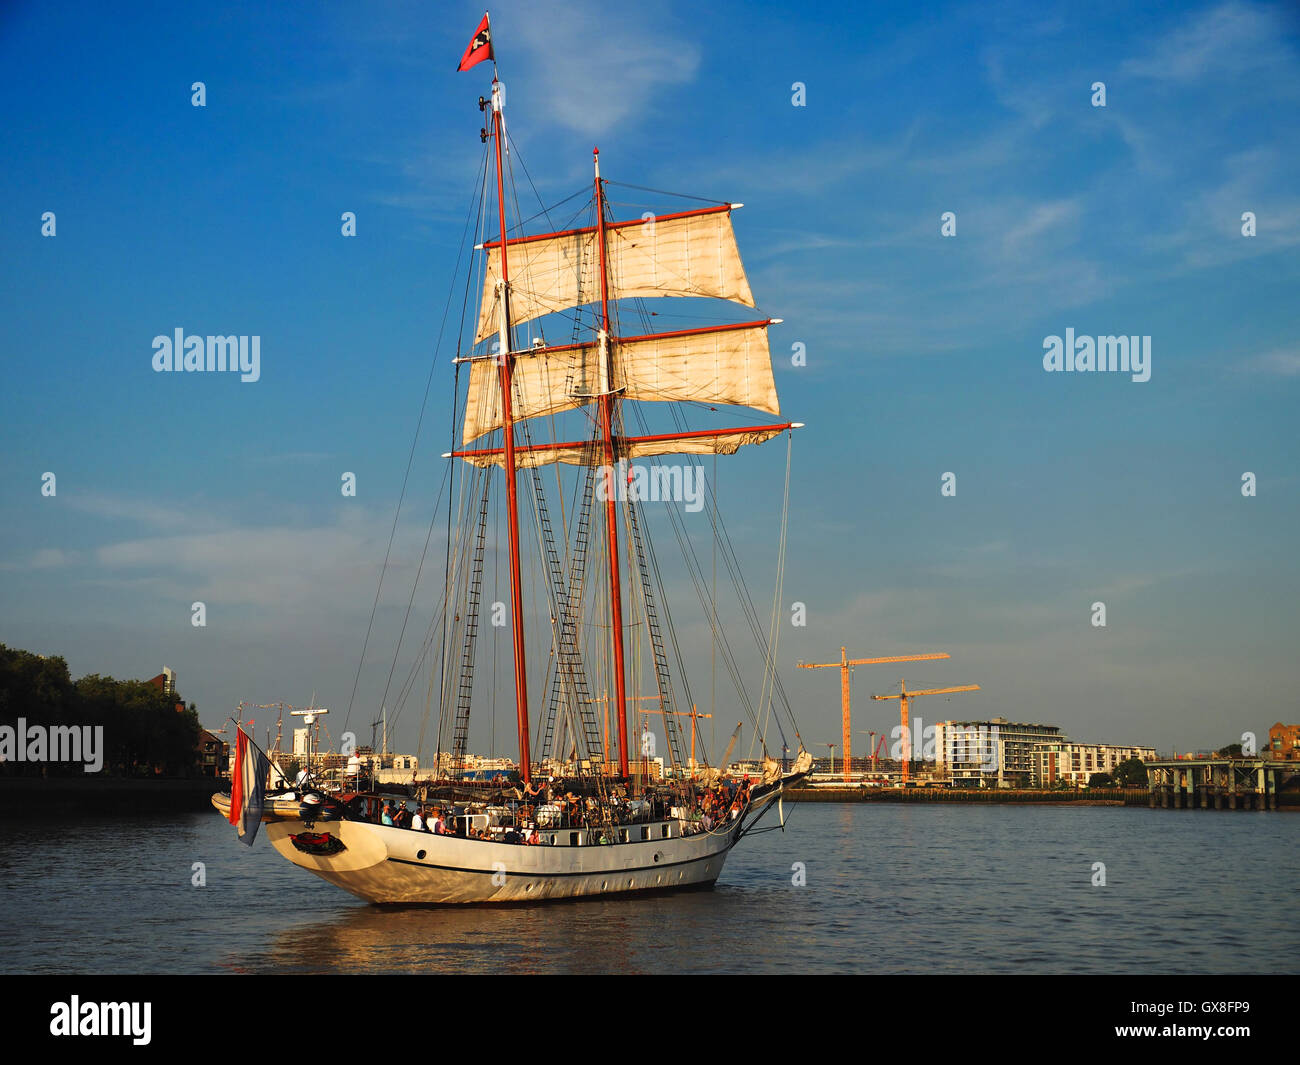 Gaff-topsail schooner J.R. Tolkien carrying visitors sailing through River Thames near Greenwich during the Tall Ships Regatta Stock Photo